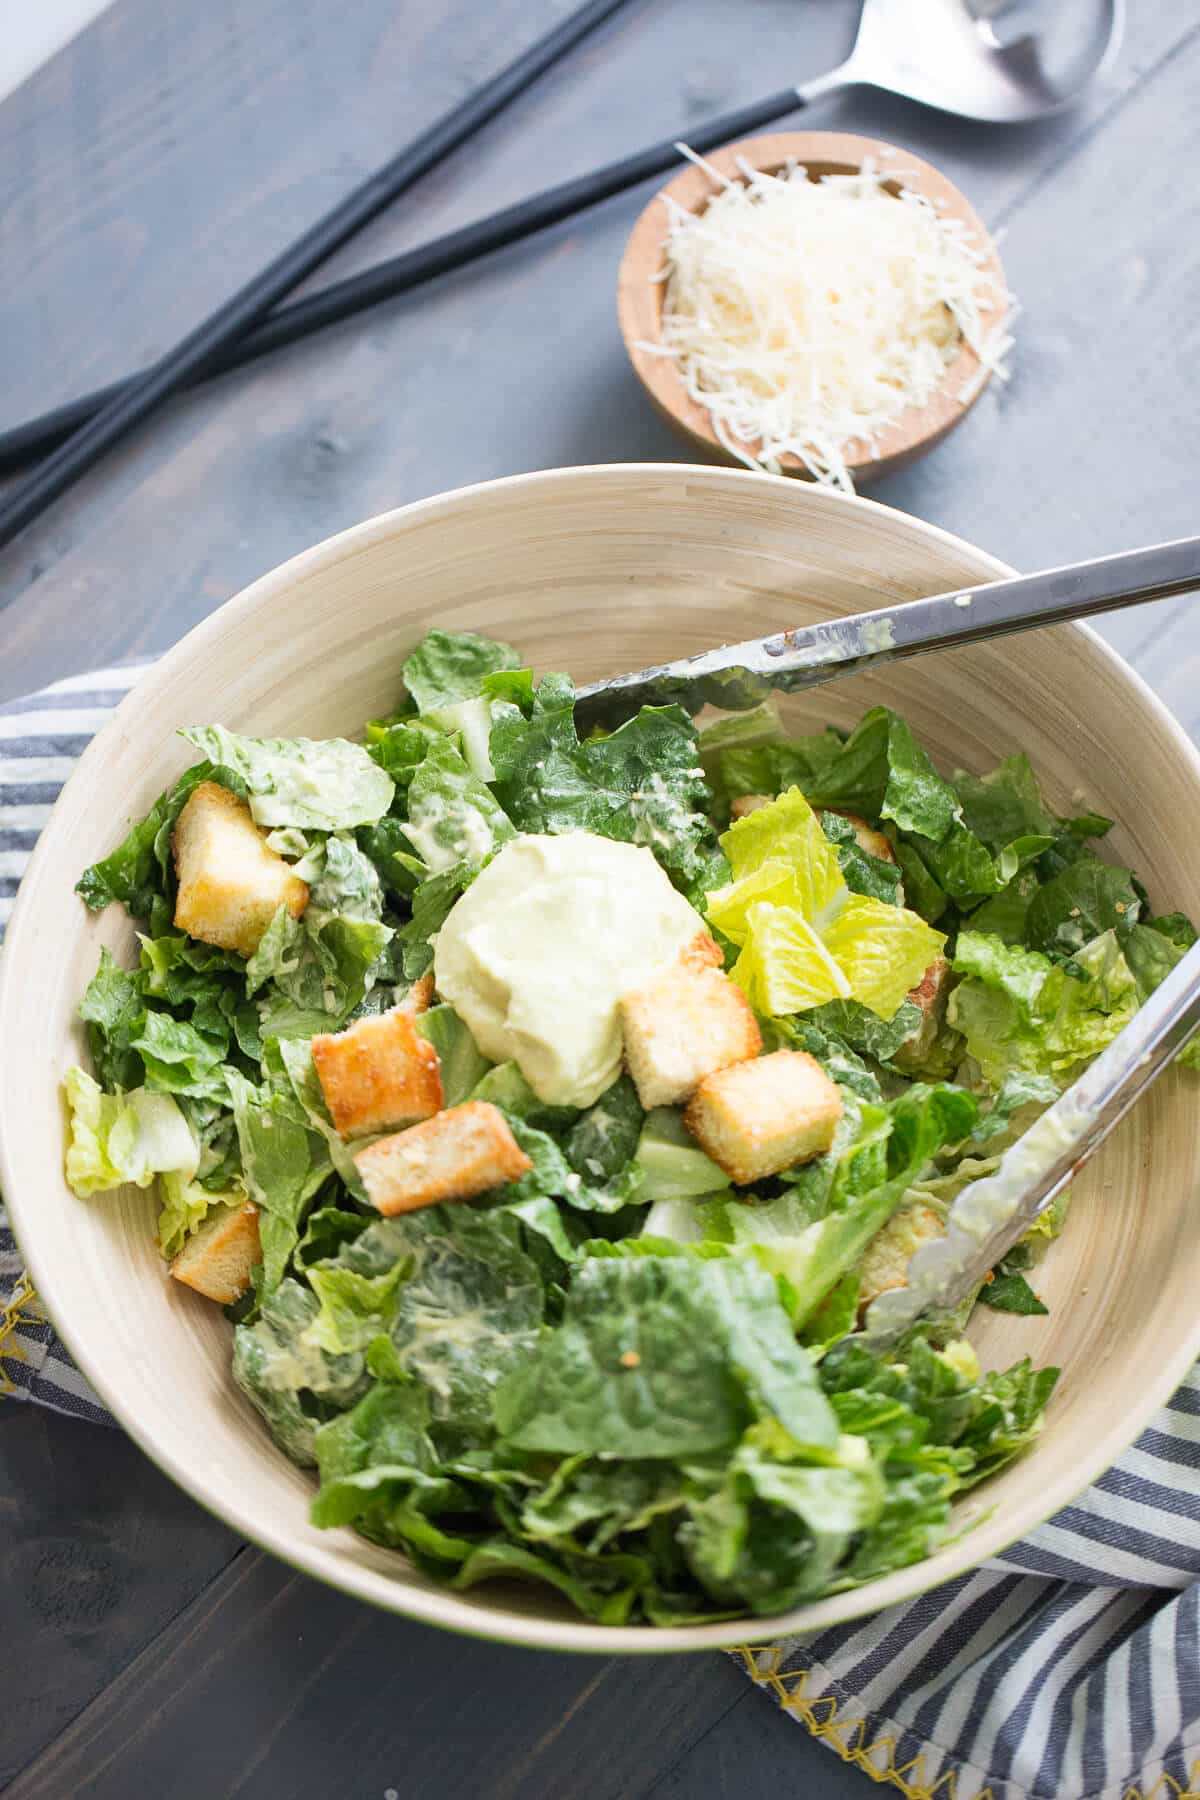 Crisp and cool lettuce is balanced by seasoned, grilled shrimp in this refreshing Shrimp Caesar Salad! Traditional Caesar salad dressing is replaced with an avocado dressing that adds just the right amount of creaminess to each bite!